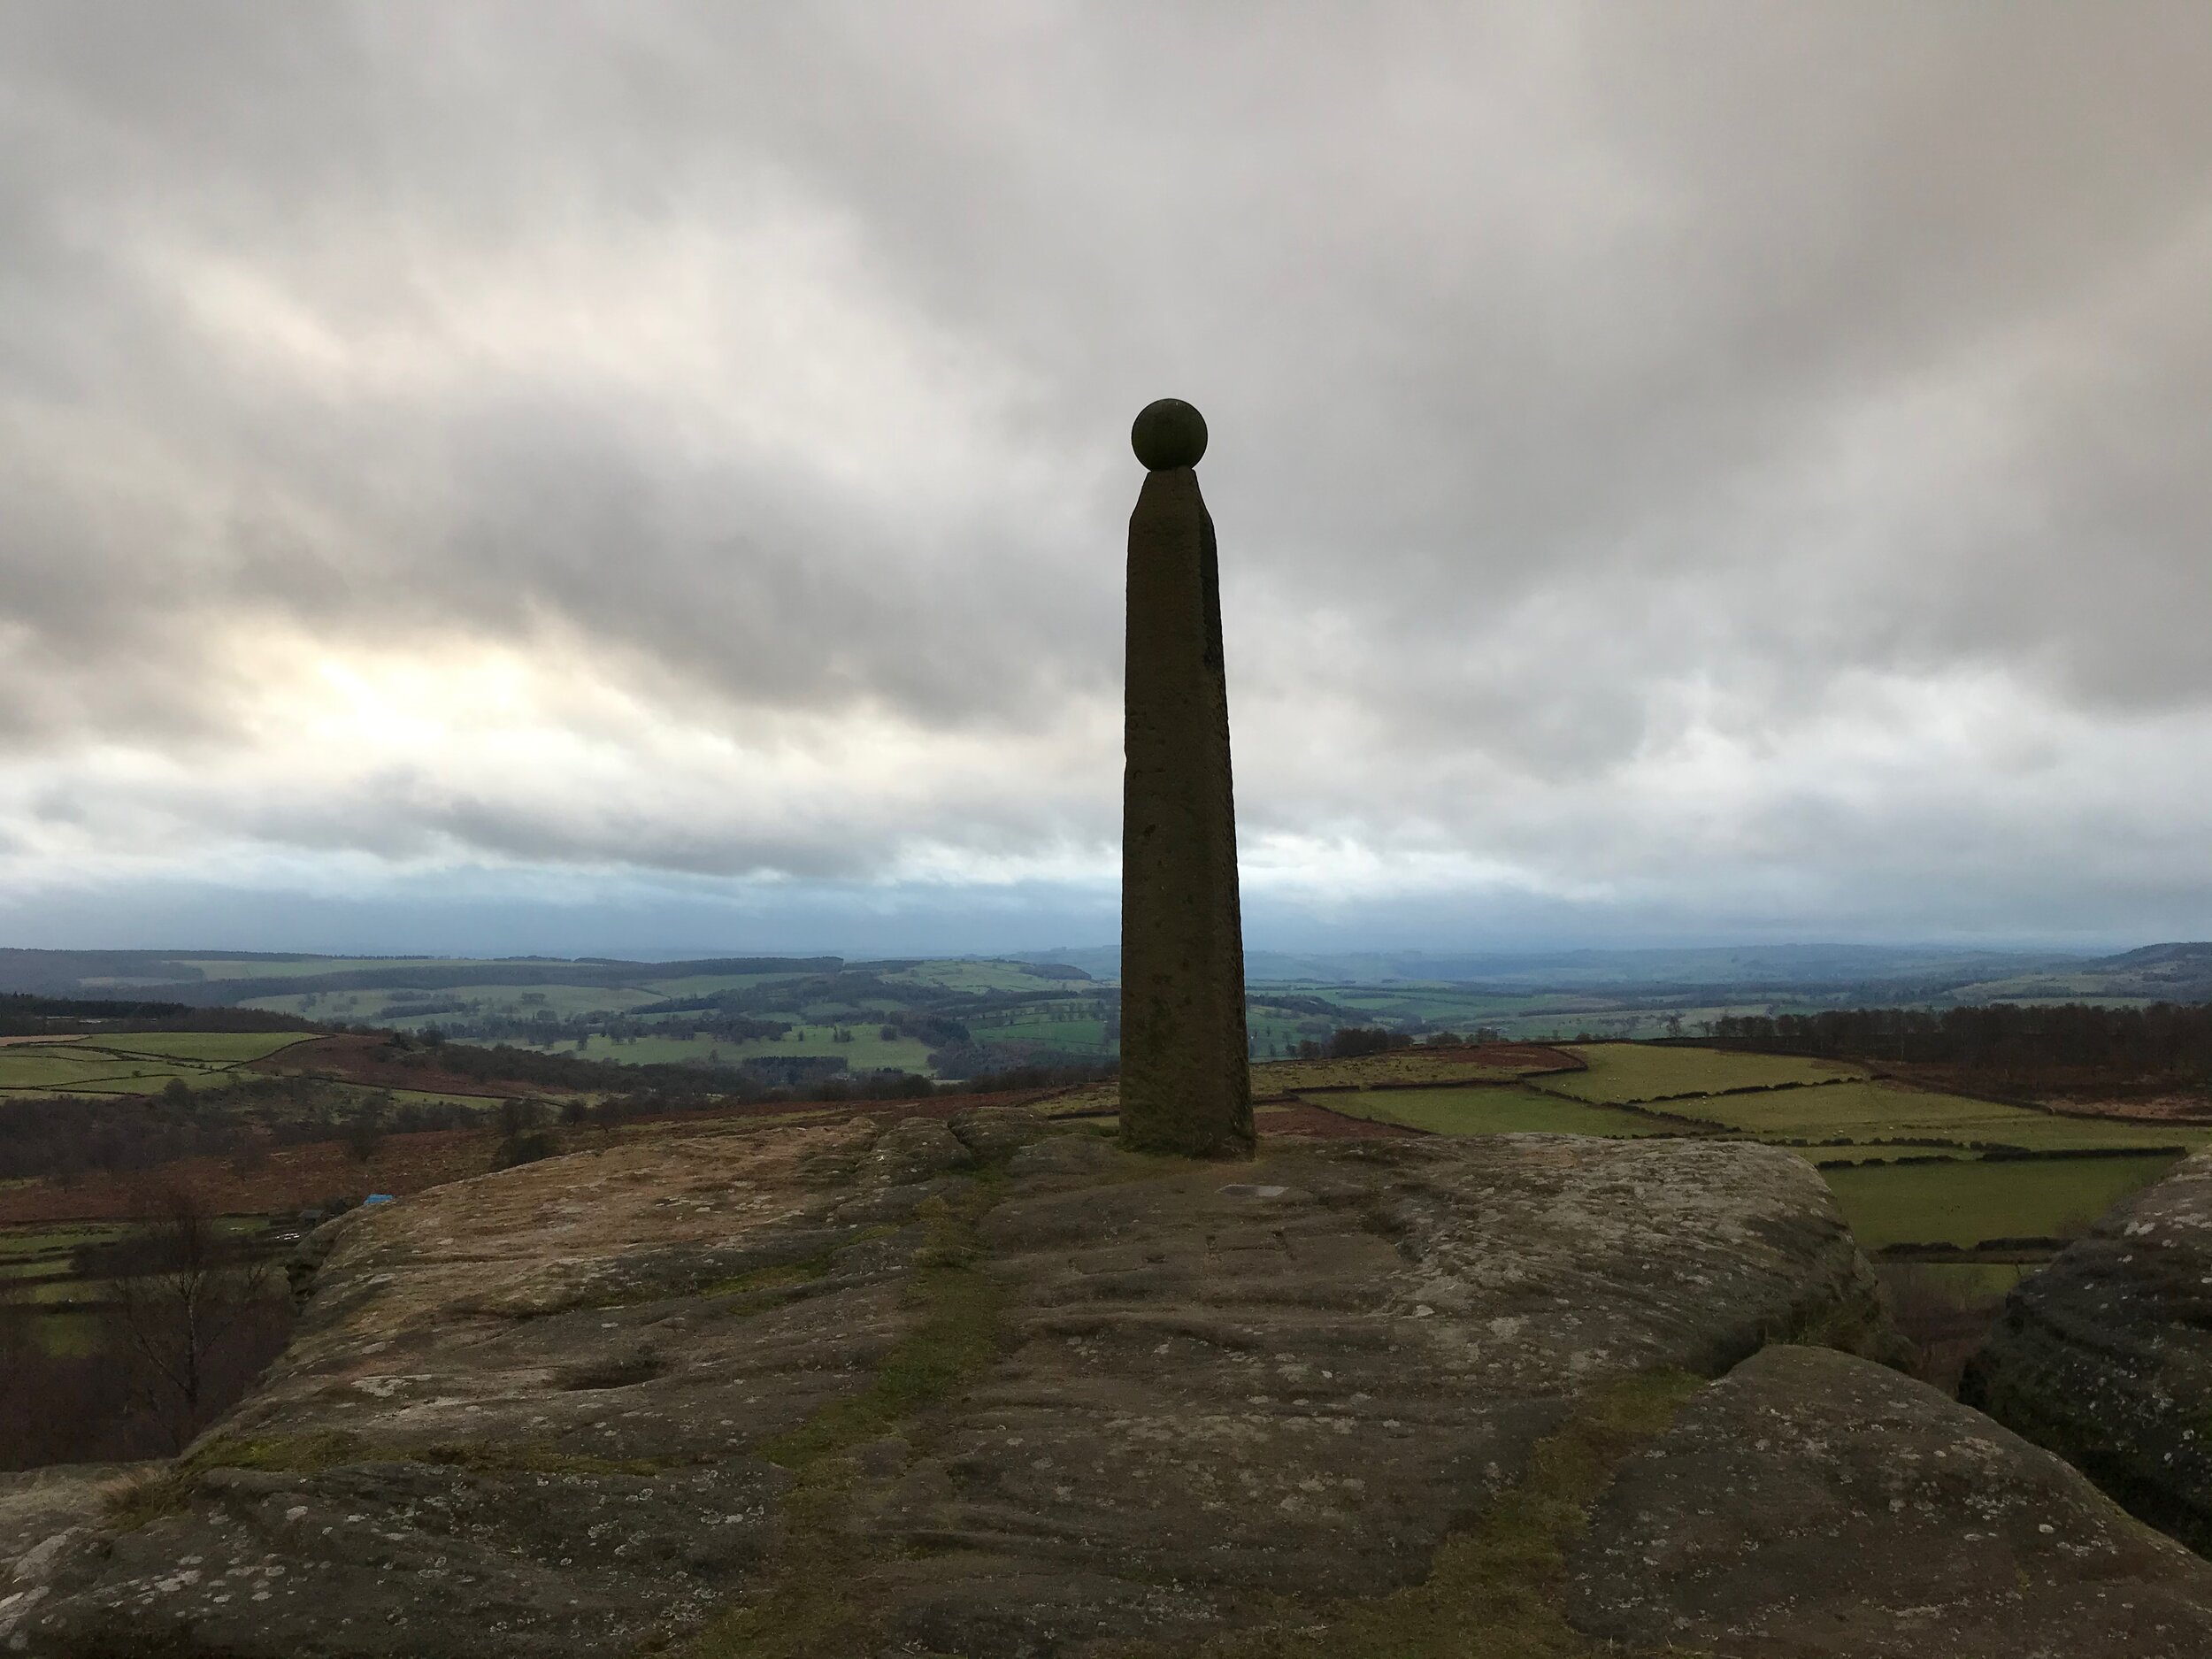  The three-metre gritstone obelisk right on the edge of Birchen Edge, overlooking the Derbyshire landscape. 